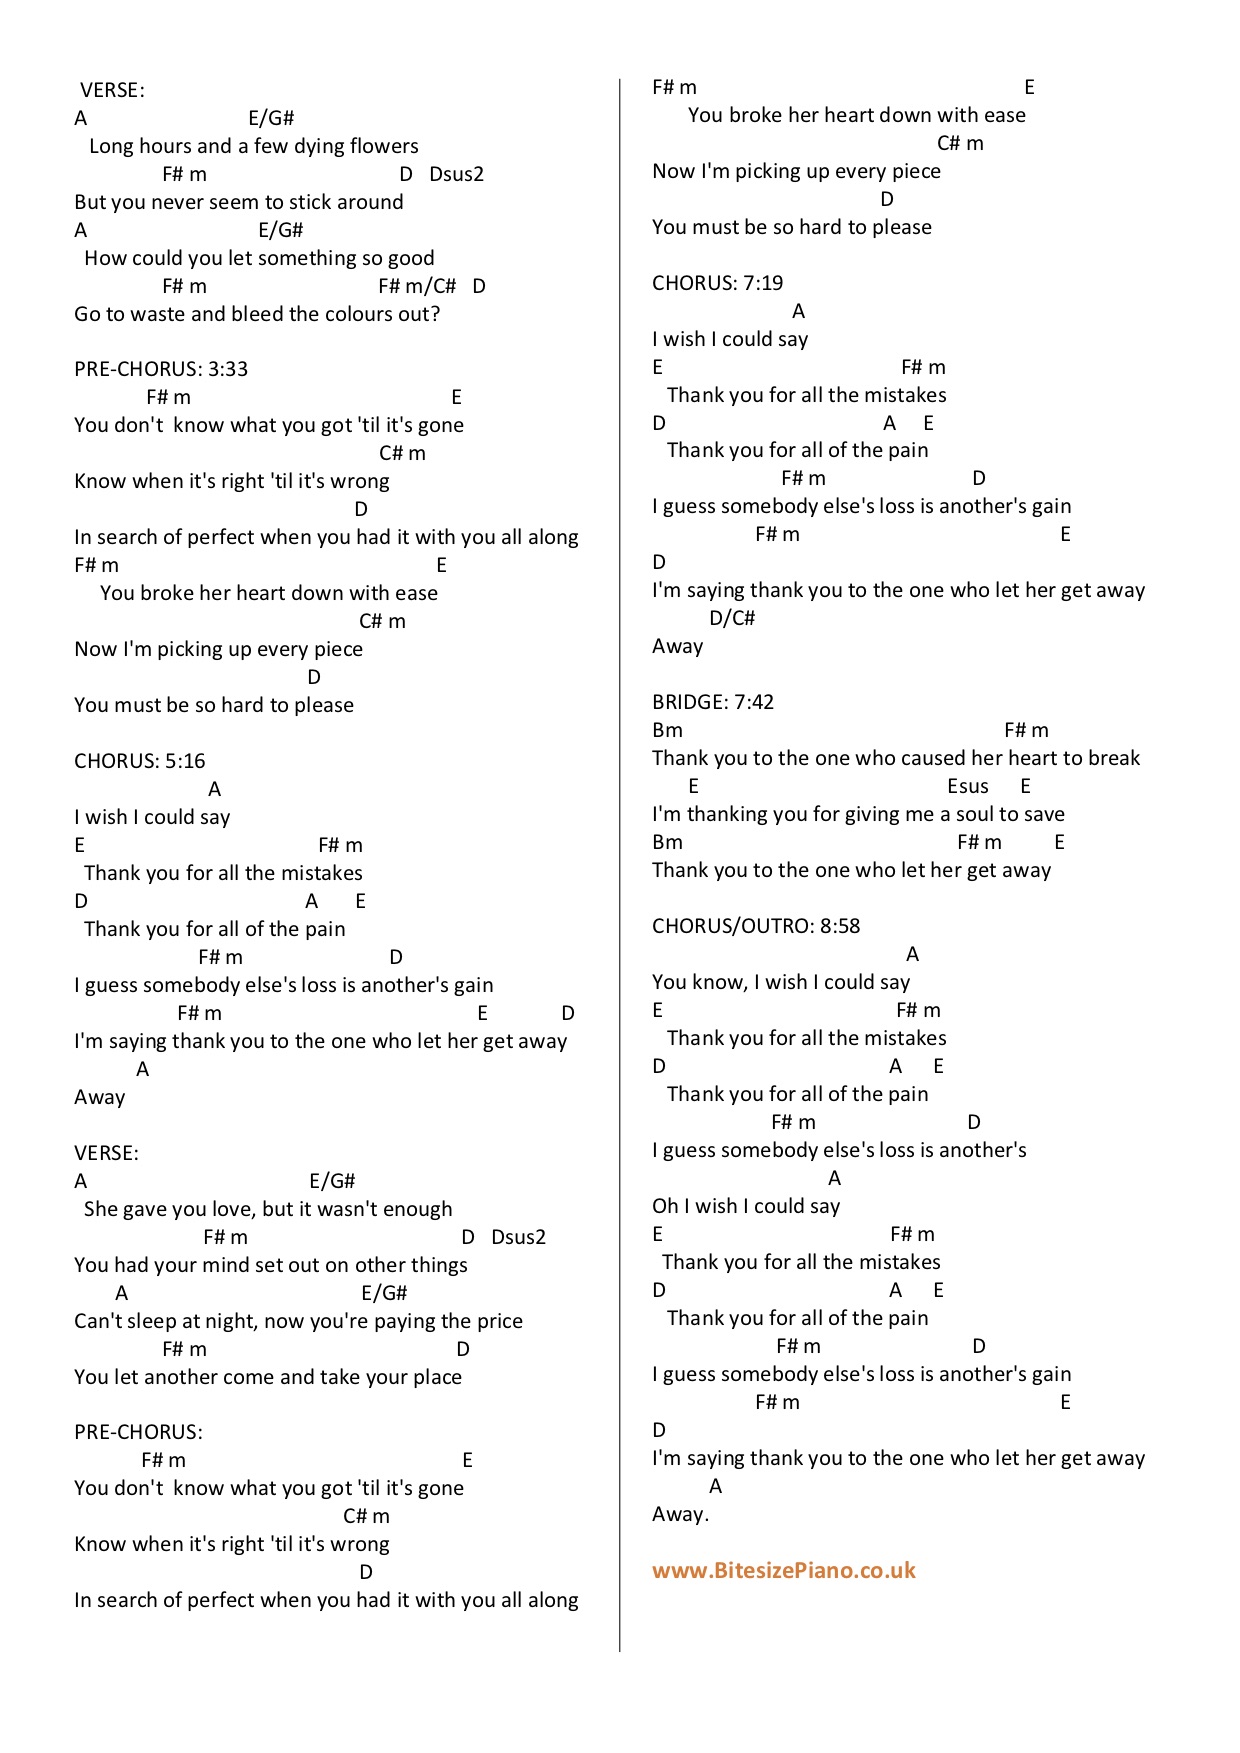 One Lewis Capaldi Piano Chords Lyrics Bitesize Piano Bruises is the second track and first single from lewis capaldi's first album, divinely uninspired to a hellish extent (expanded edition). lewis capaldi piano chords lyrics